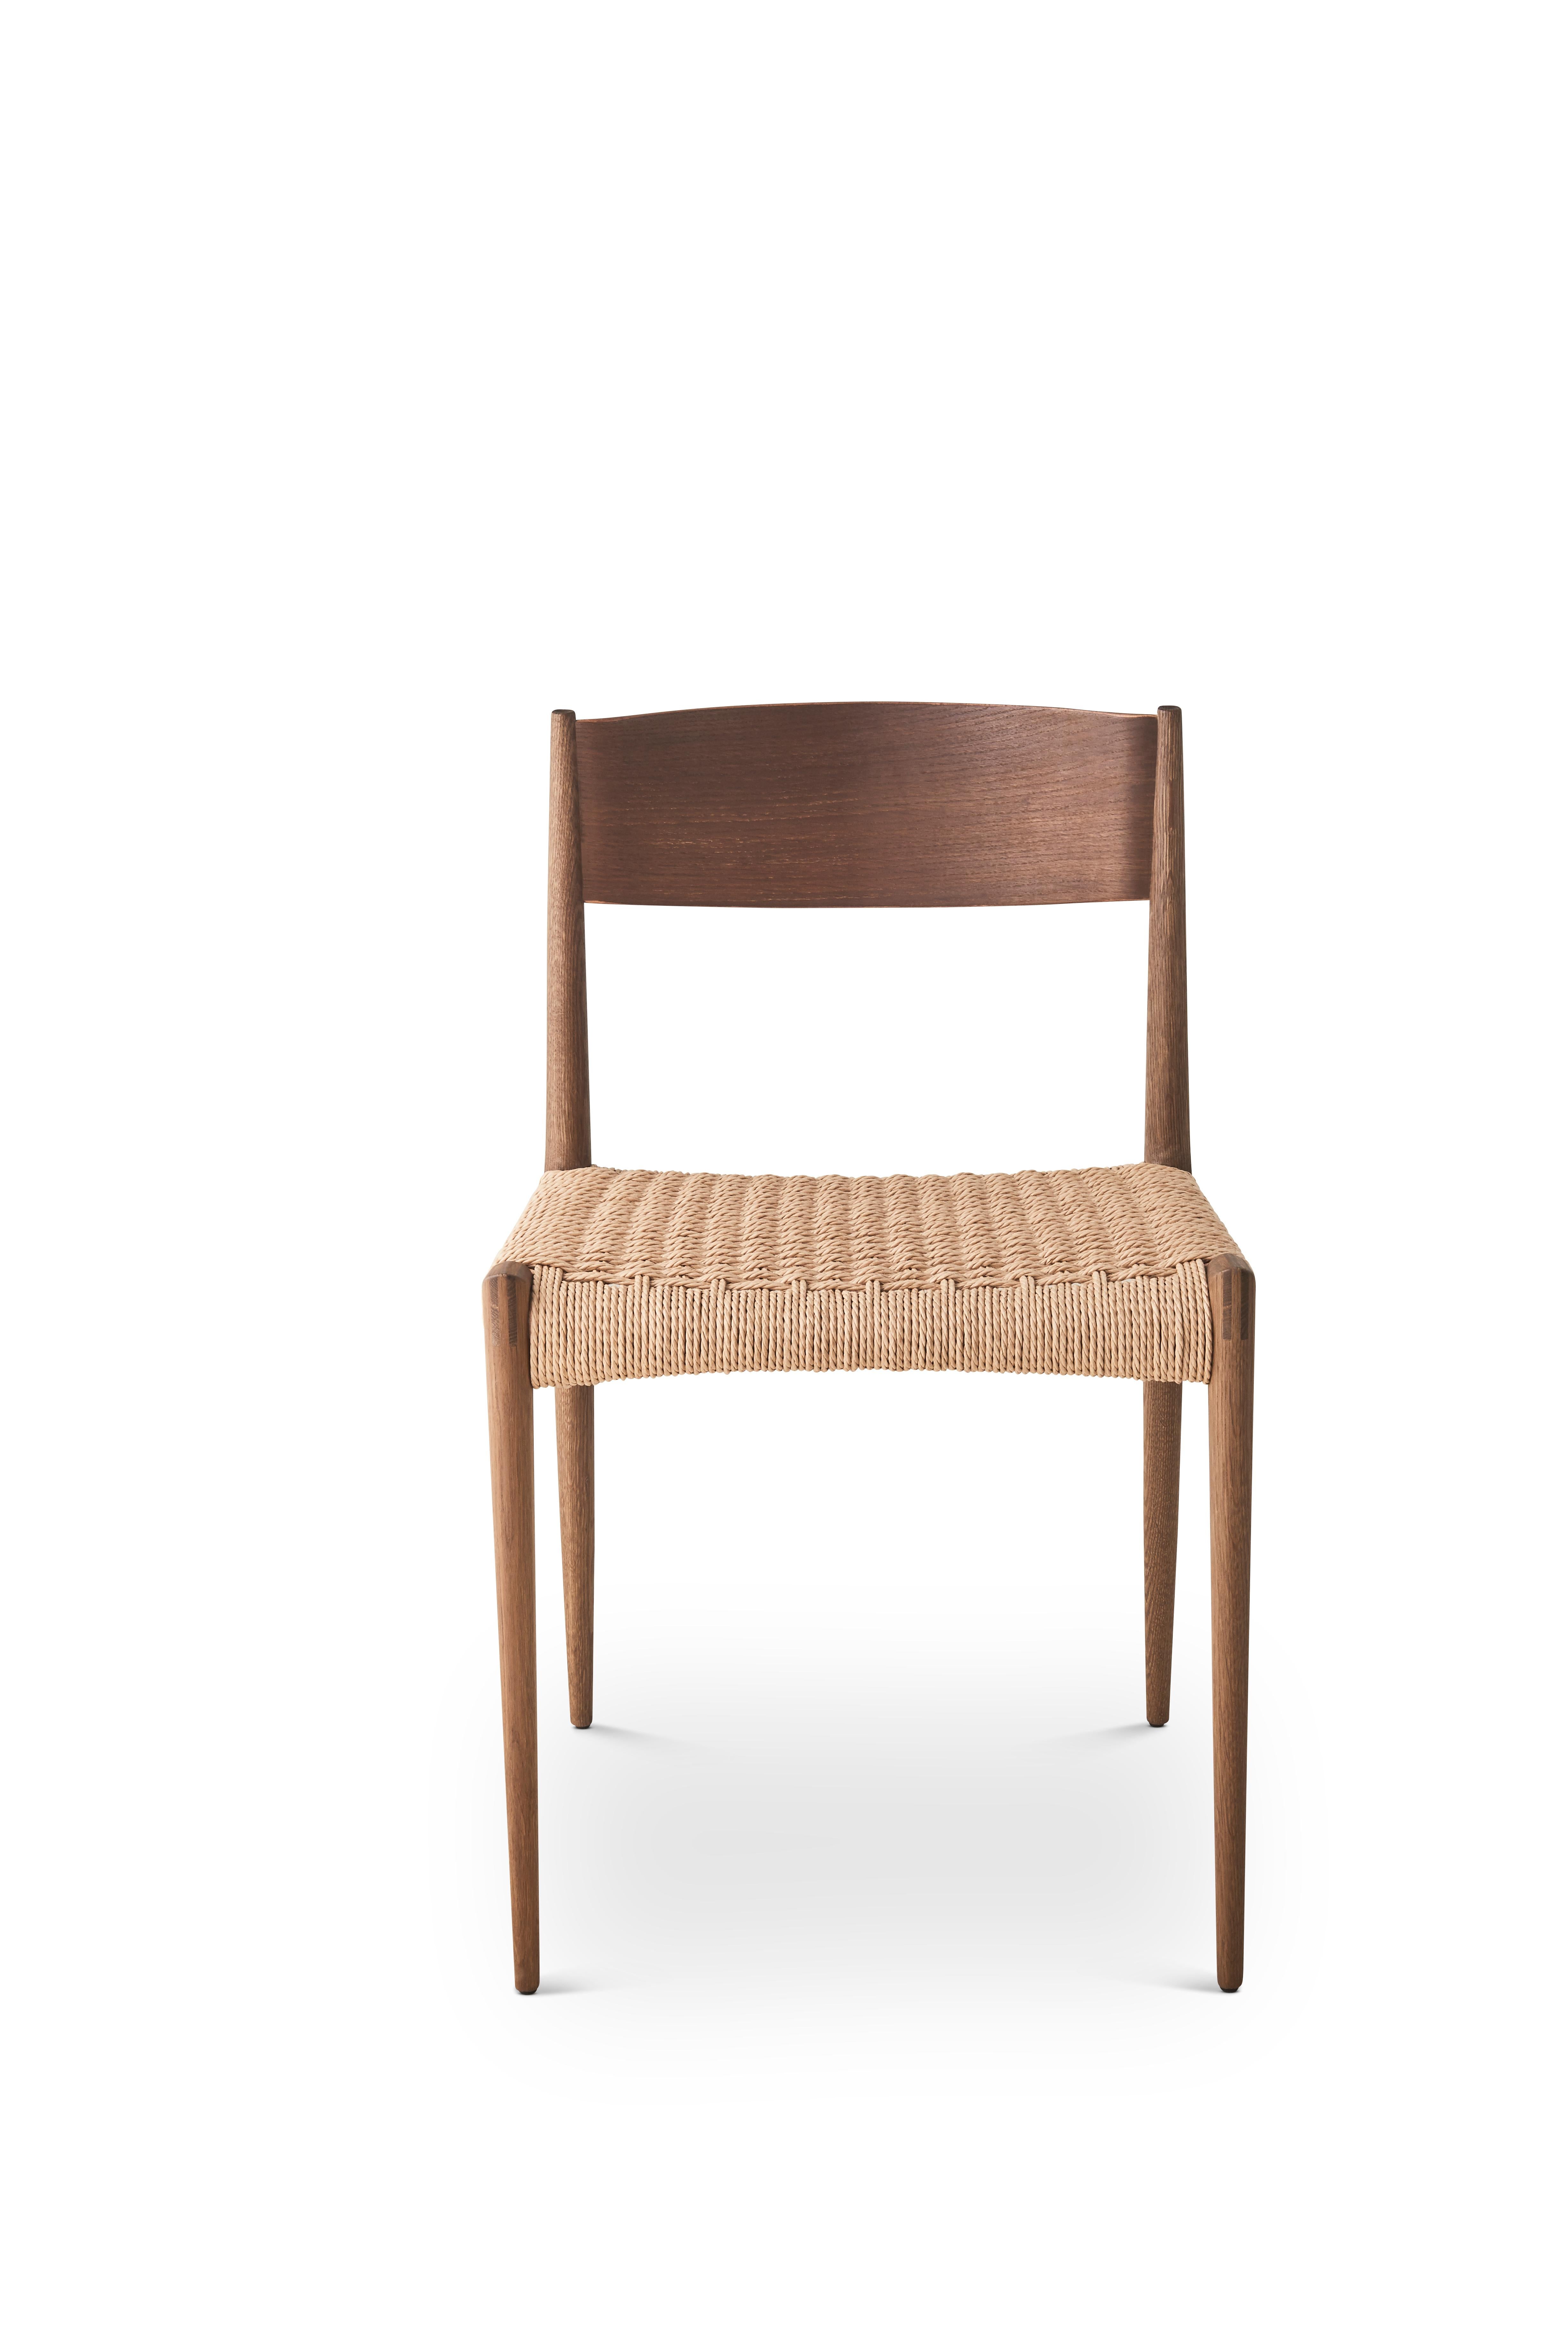 PIA chair
Solid oak frame, paper cordel seat
Dimensions: H 75 x 49 x 48 cm (seat height 45cm)

Wood:
– Oak
– Smoked oak
– Black lacquered oak
– Walnut

Paper cordel:
– Natural
– Black (Contact us)

--
The Pia chair signed by DK3 was imagined and